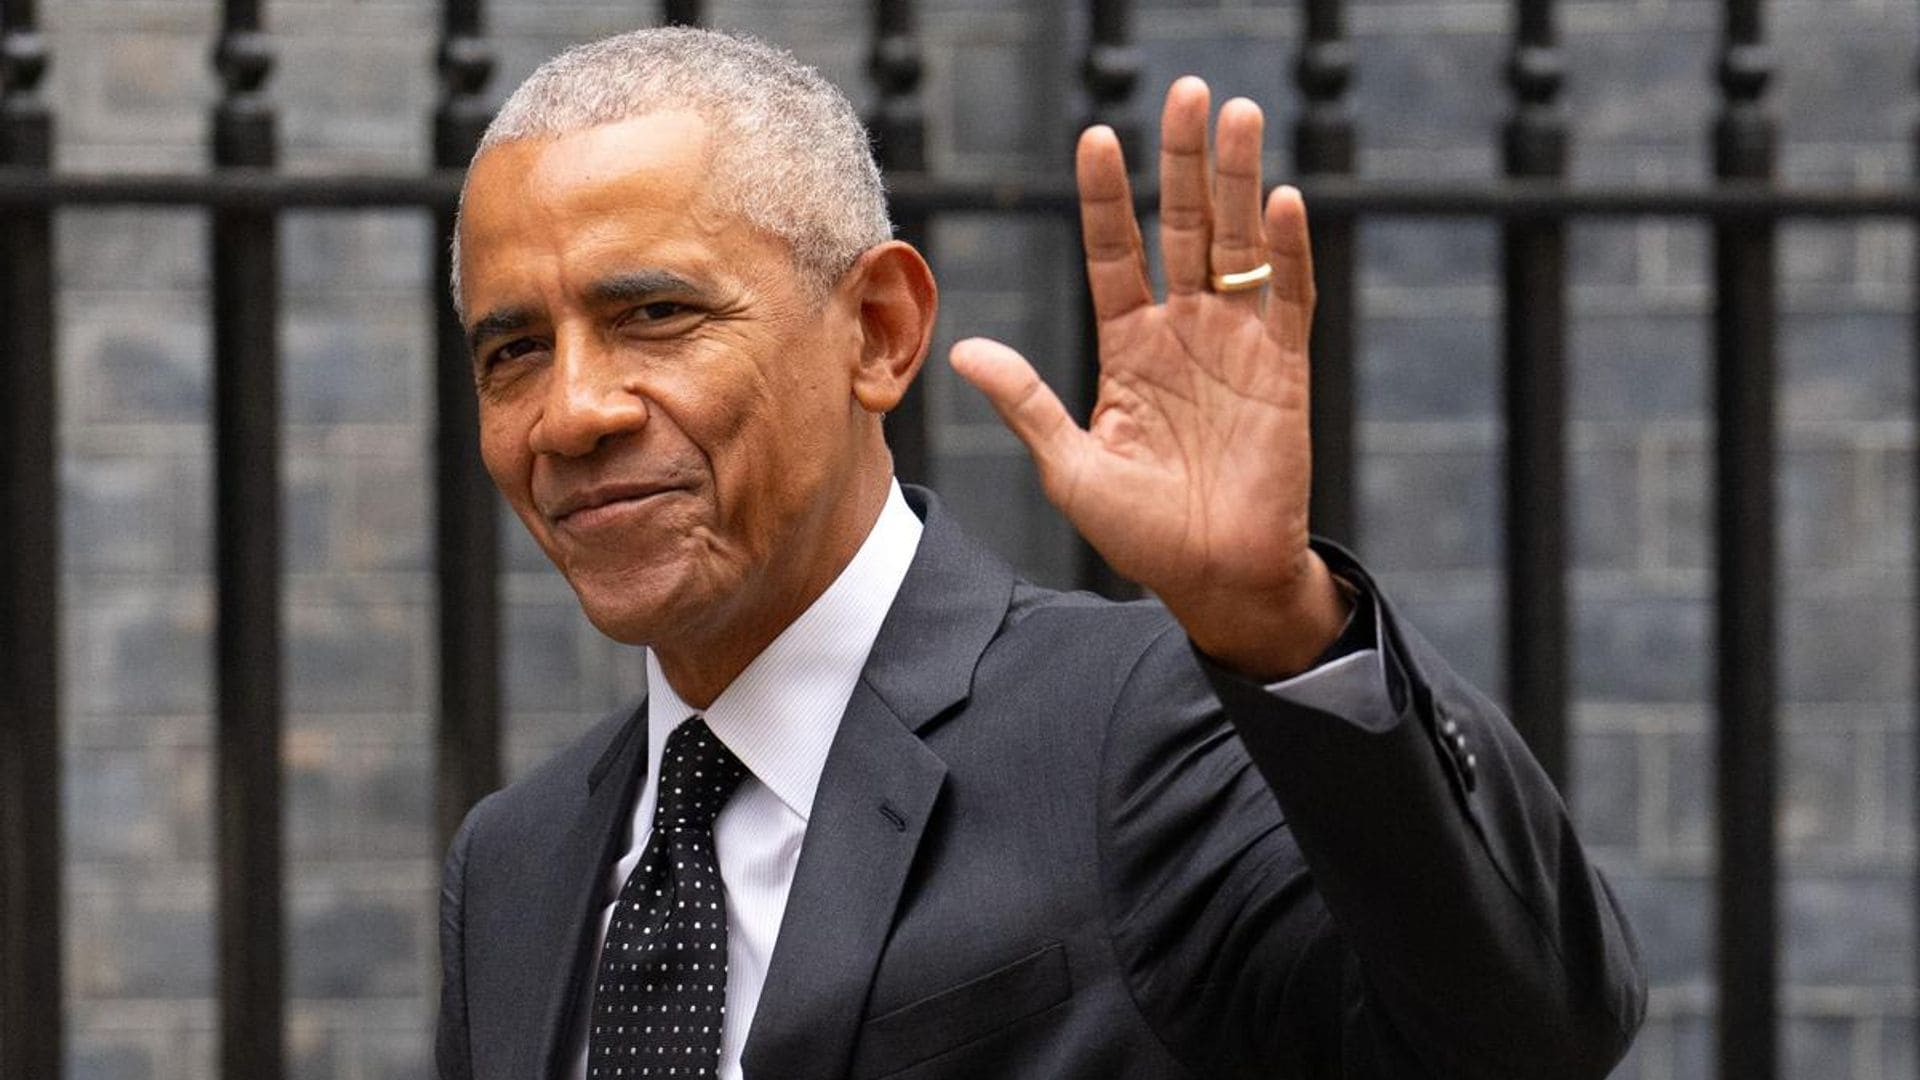 Barack Obama shares his picks for March Madness